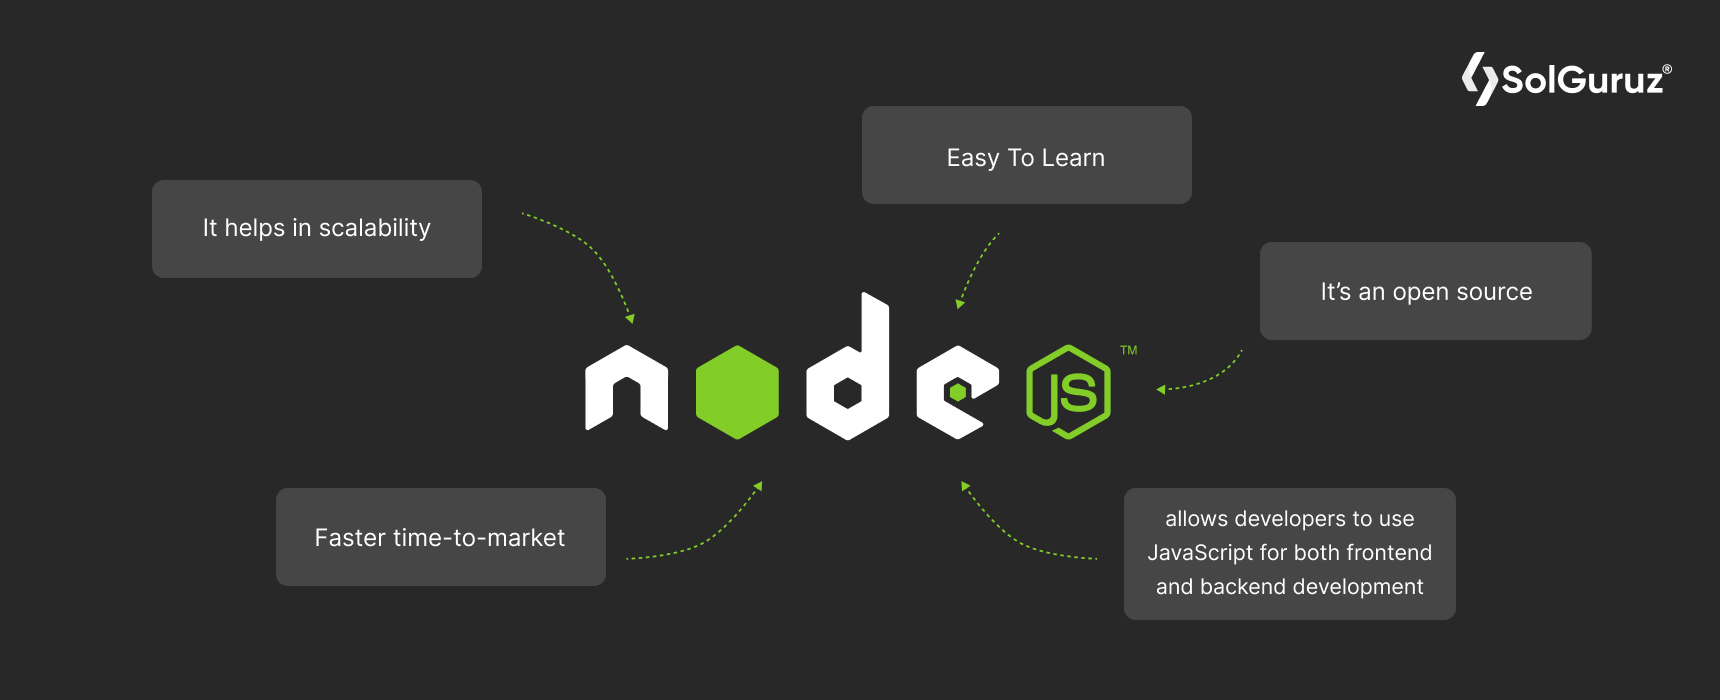 The key benefits of Node.js are easy to use, it helps in scalability, faster time to market, allows developers to use NodeJs for both front-end and backend development, and It's an open source. 